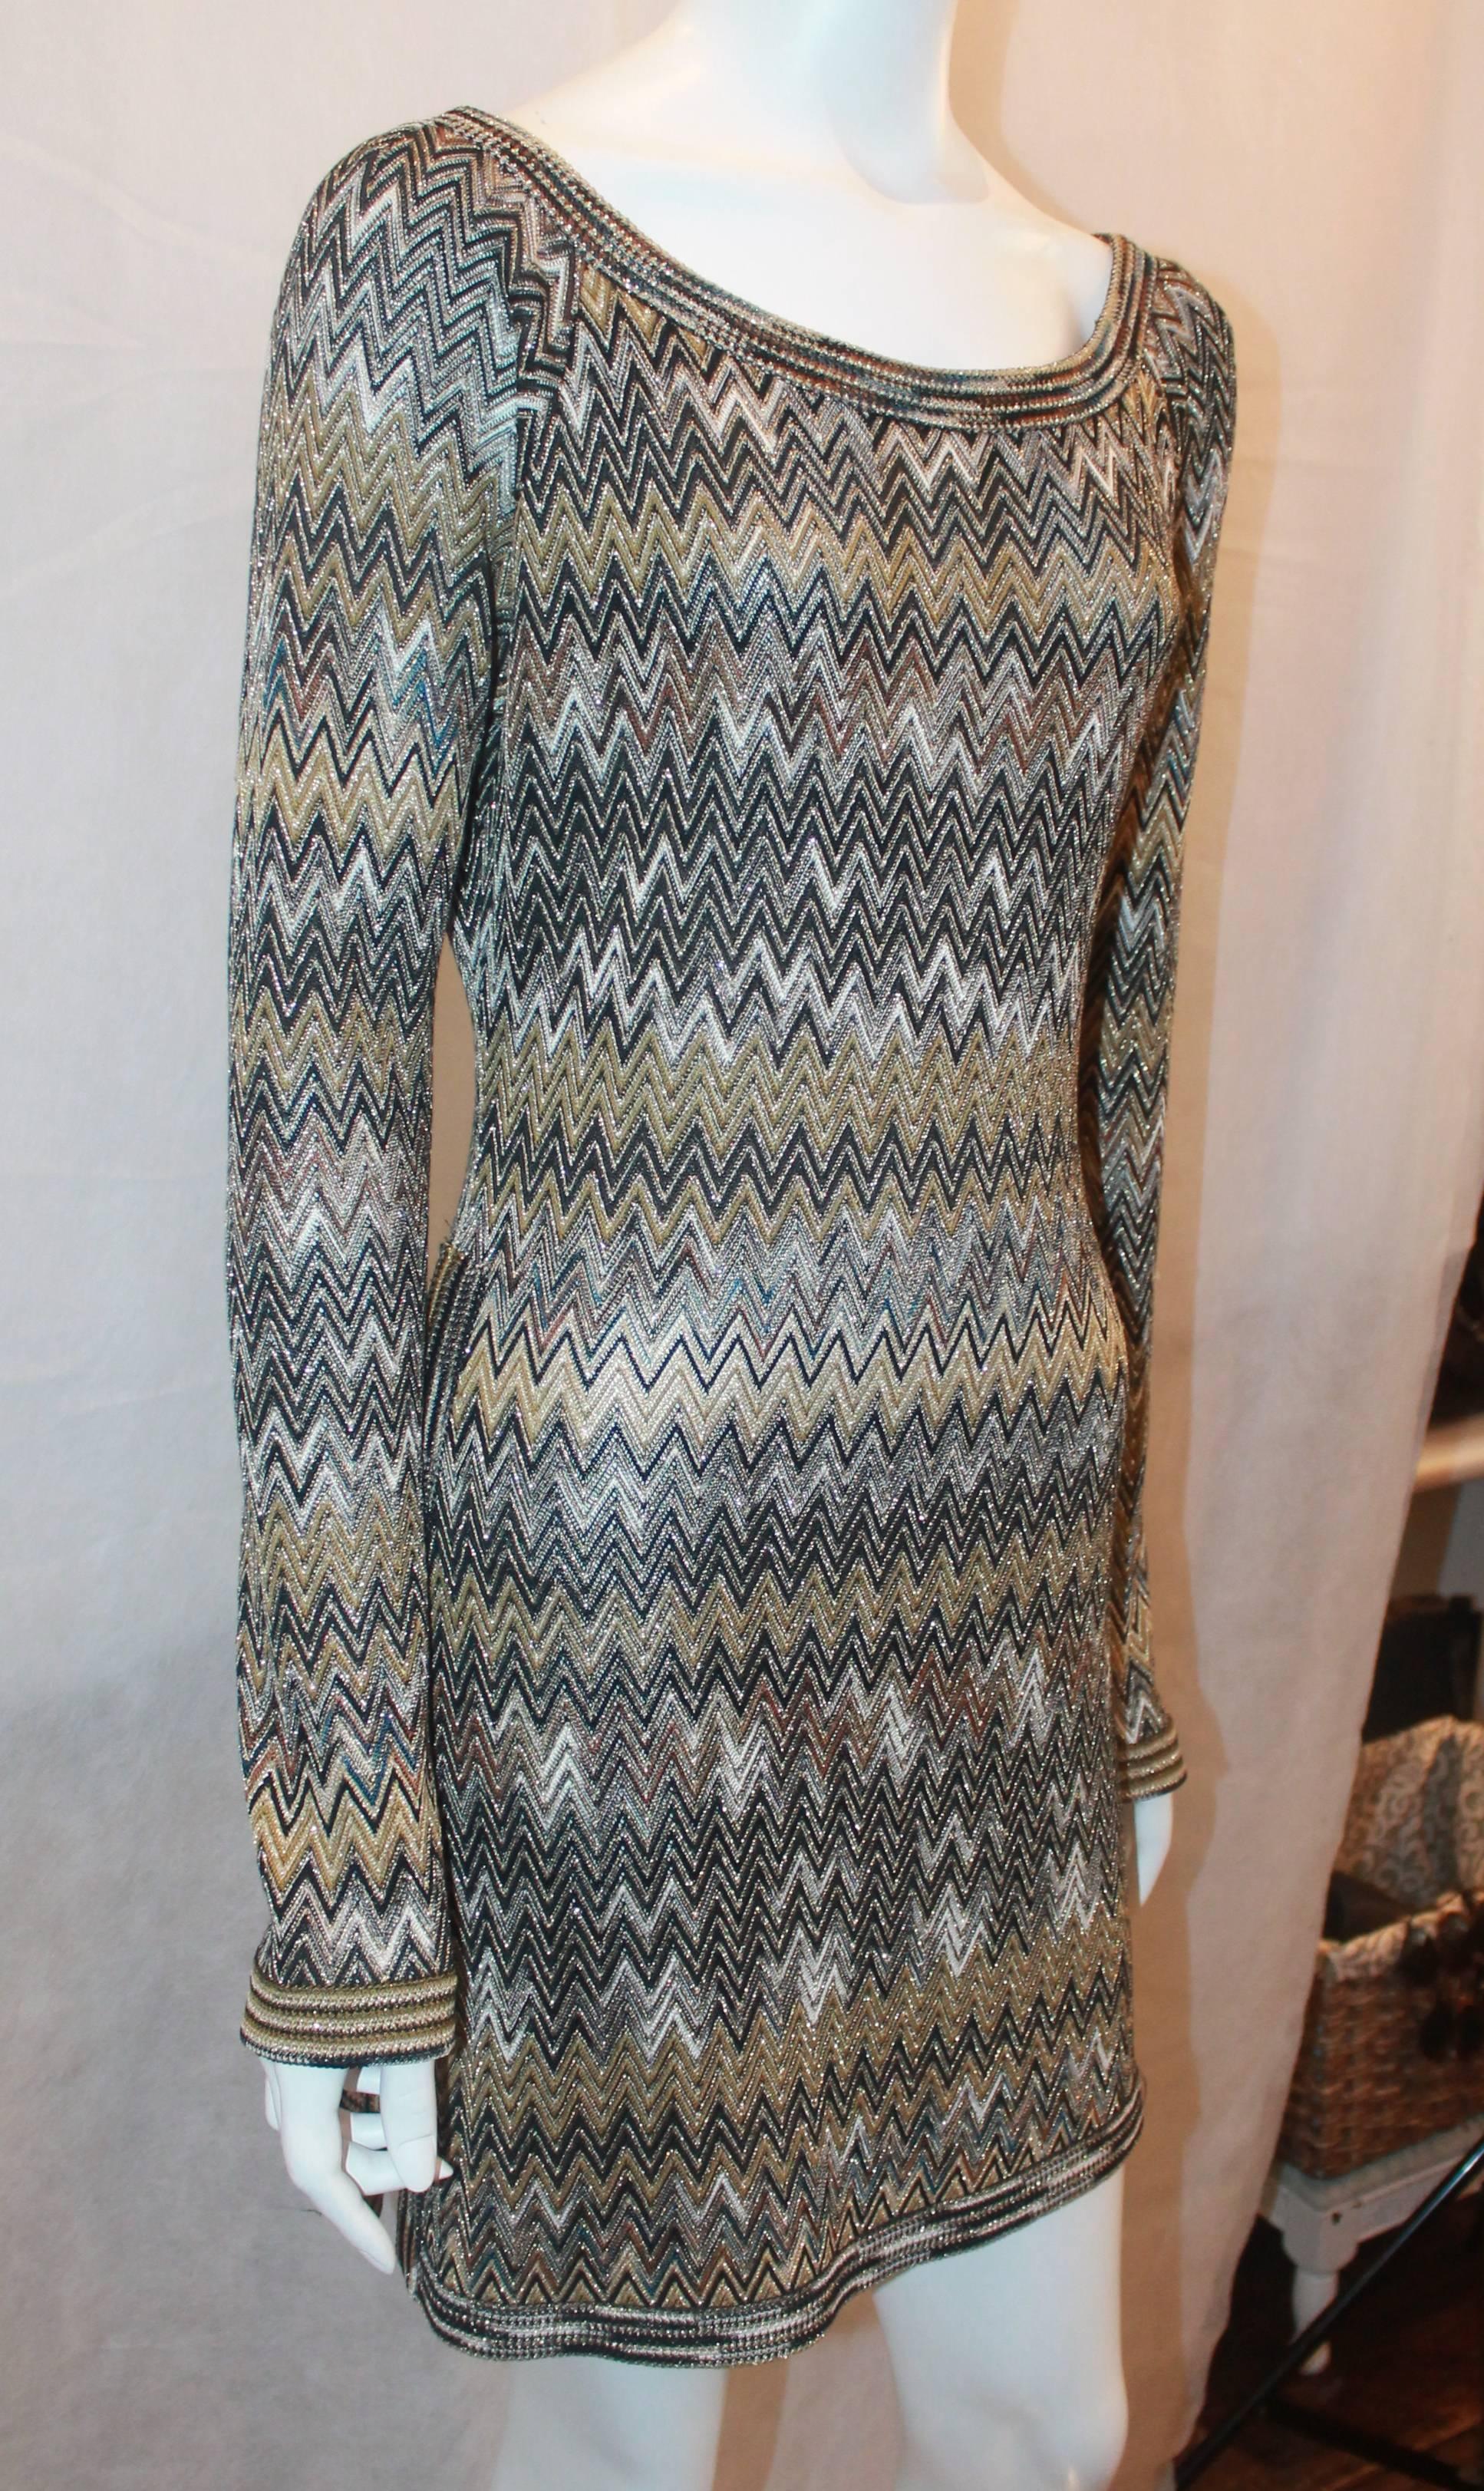 Missoni Vintage Earthtones Chevron Knitted Tunic-Style Dress - S - Circa 70's. This adorable dress is in excellent vintage condition with only very slight pulls near the bottom.  It features a lovely chevron knitted appearance, a v-style back, a